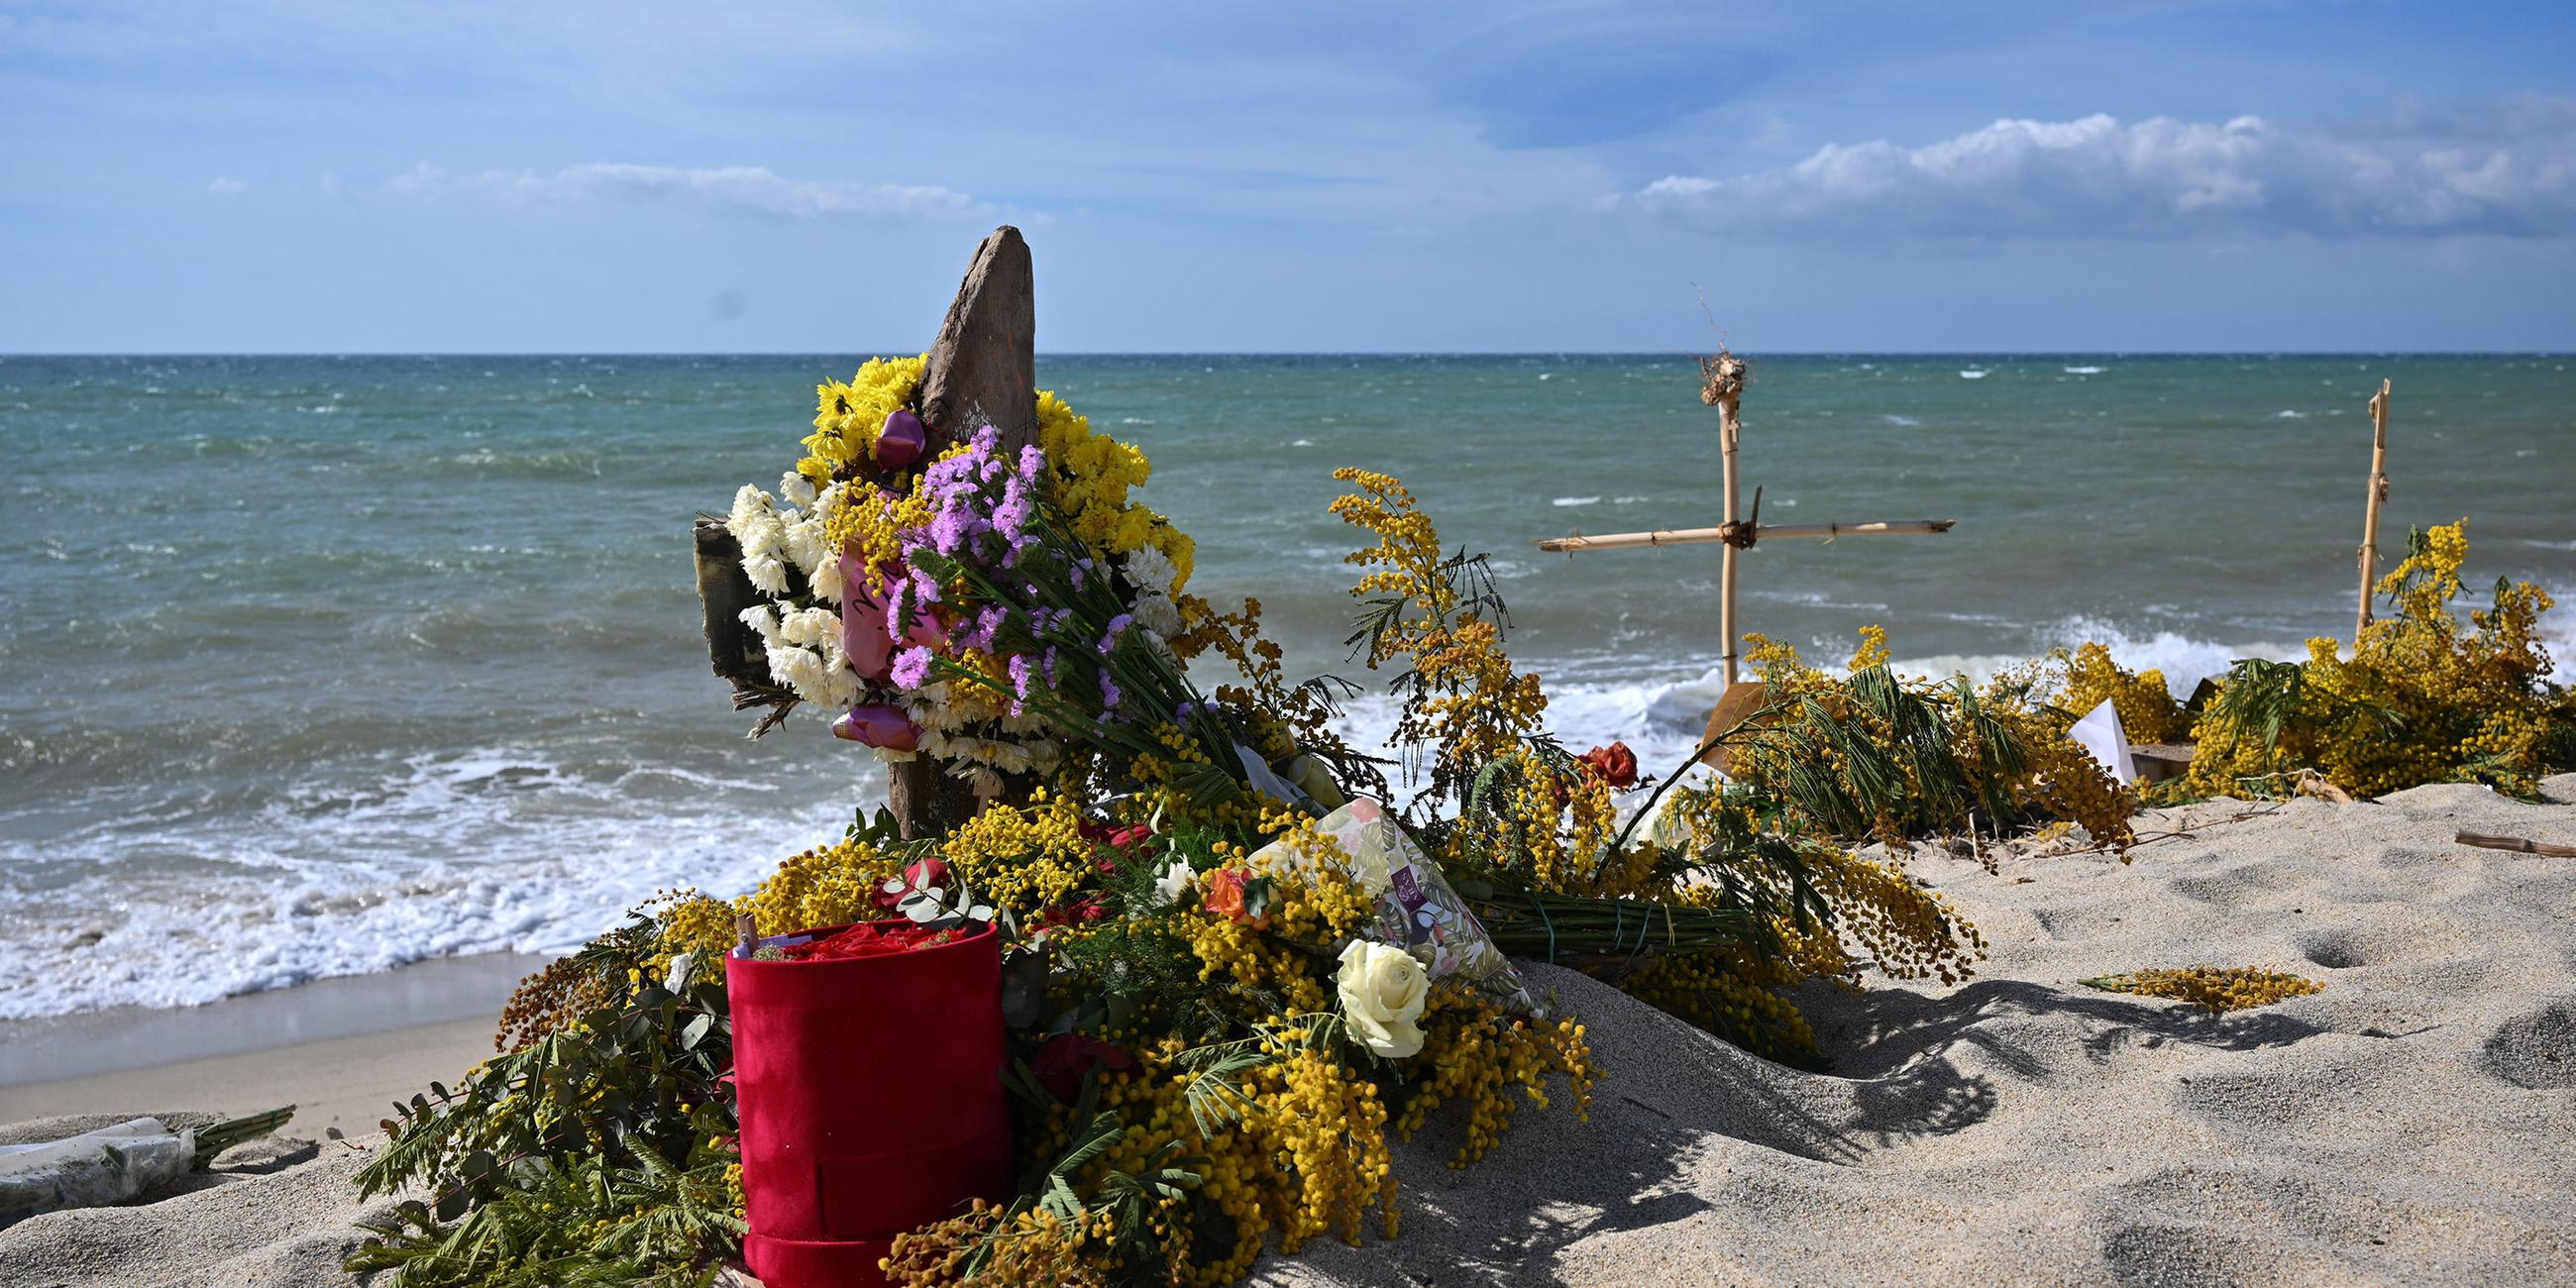 Crosses and flowers to pay homage to the victims of the Steccato di Cutro shipwreck